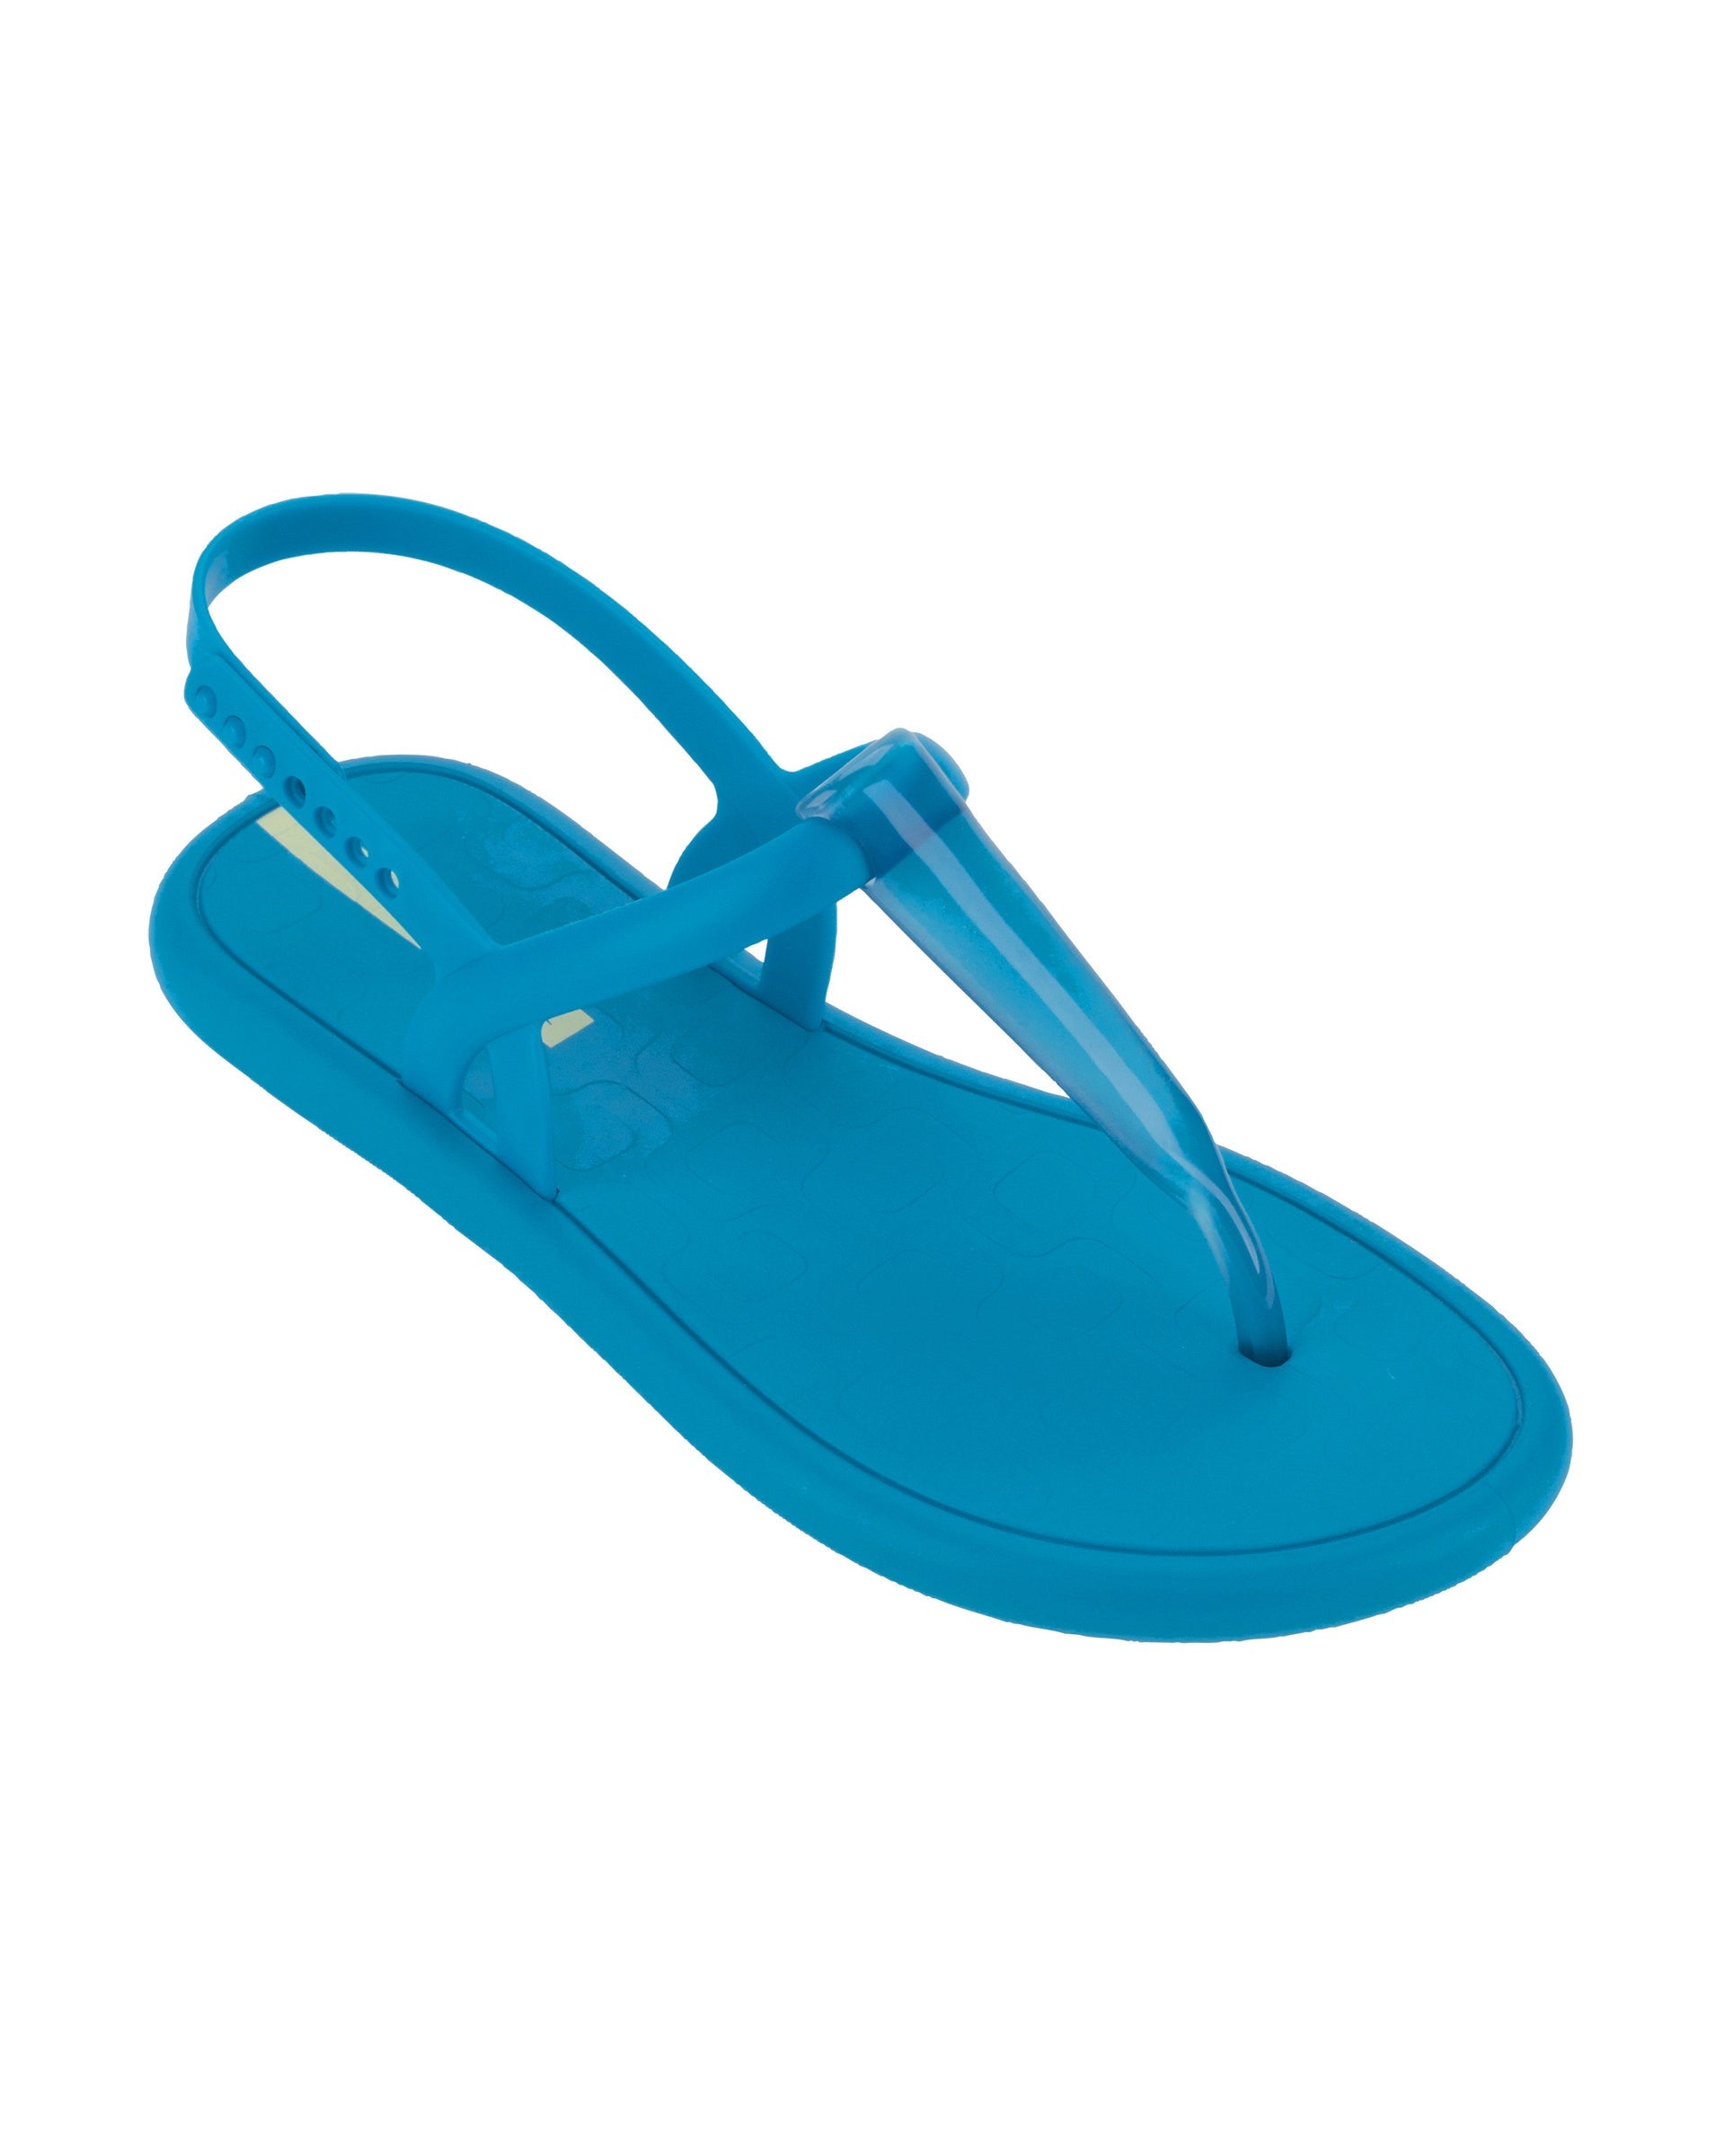 Angled view of a blue Ipanema Glossy women's t-strap sandal.